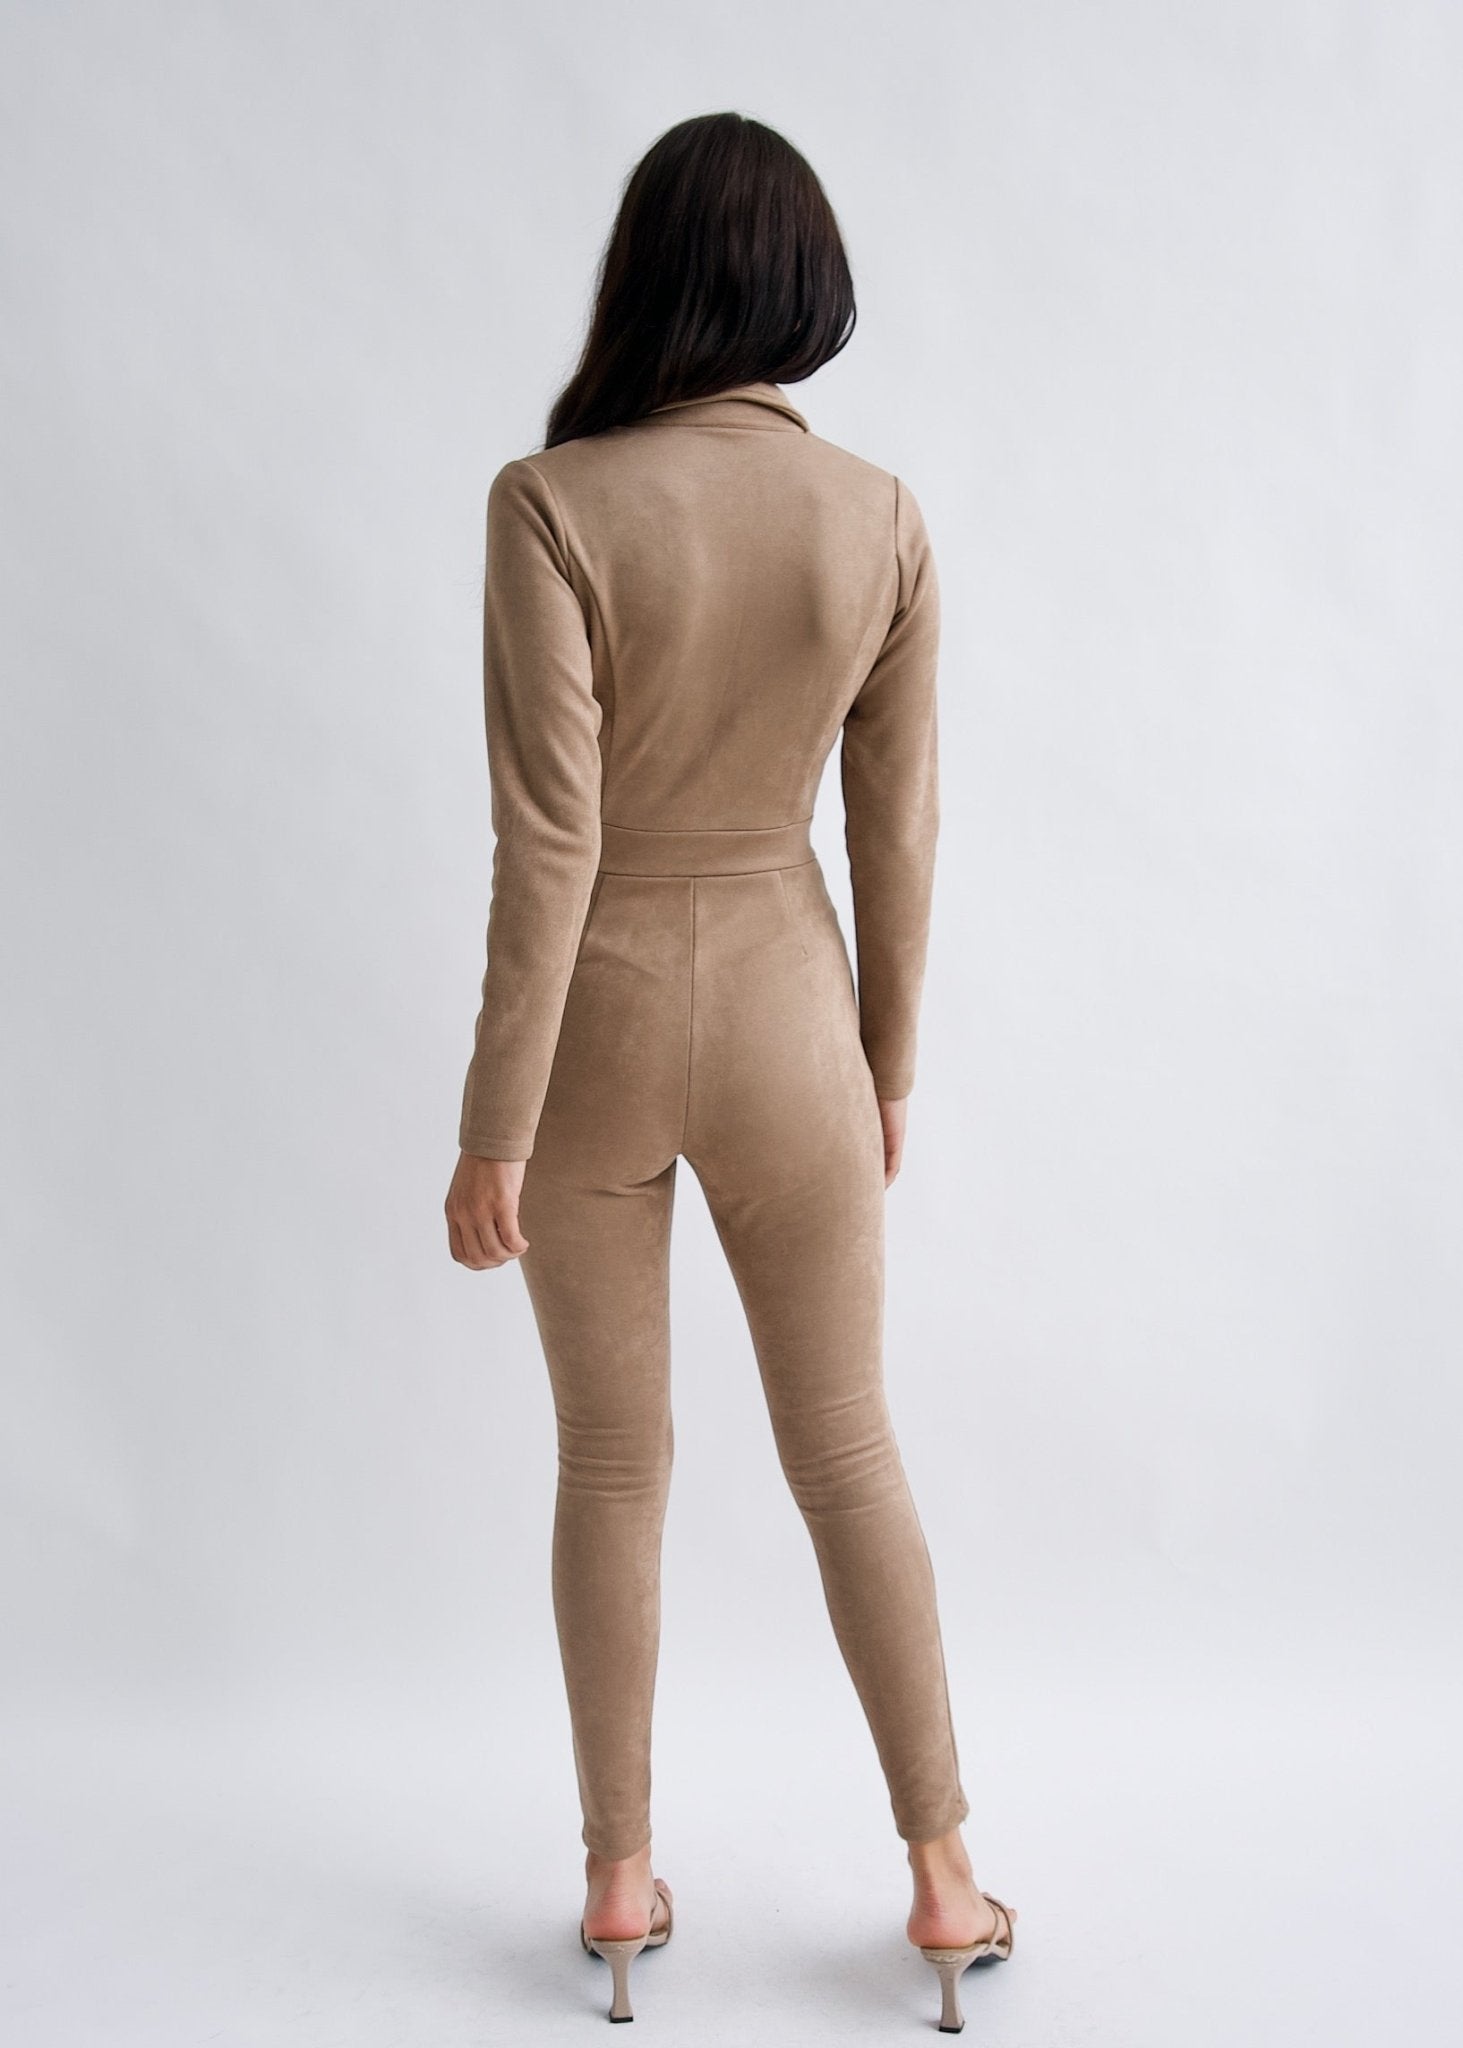 "Emma Peel" Mocha Faux Suede Jumpsuit-Why Mary-stride